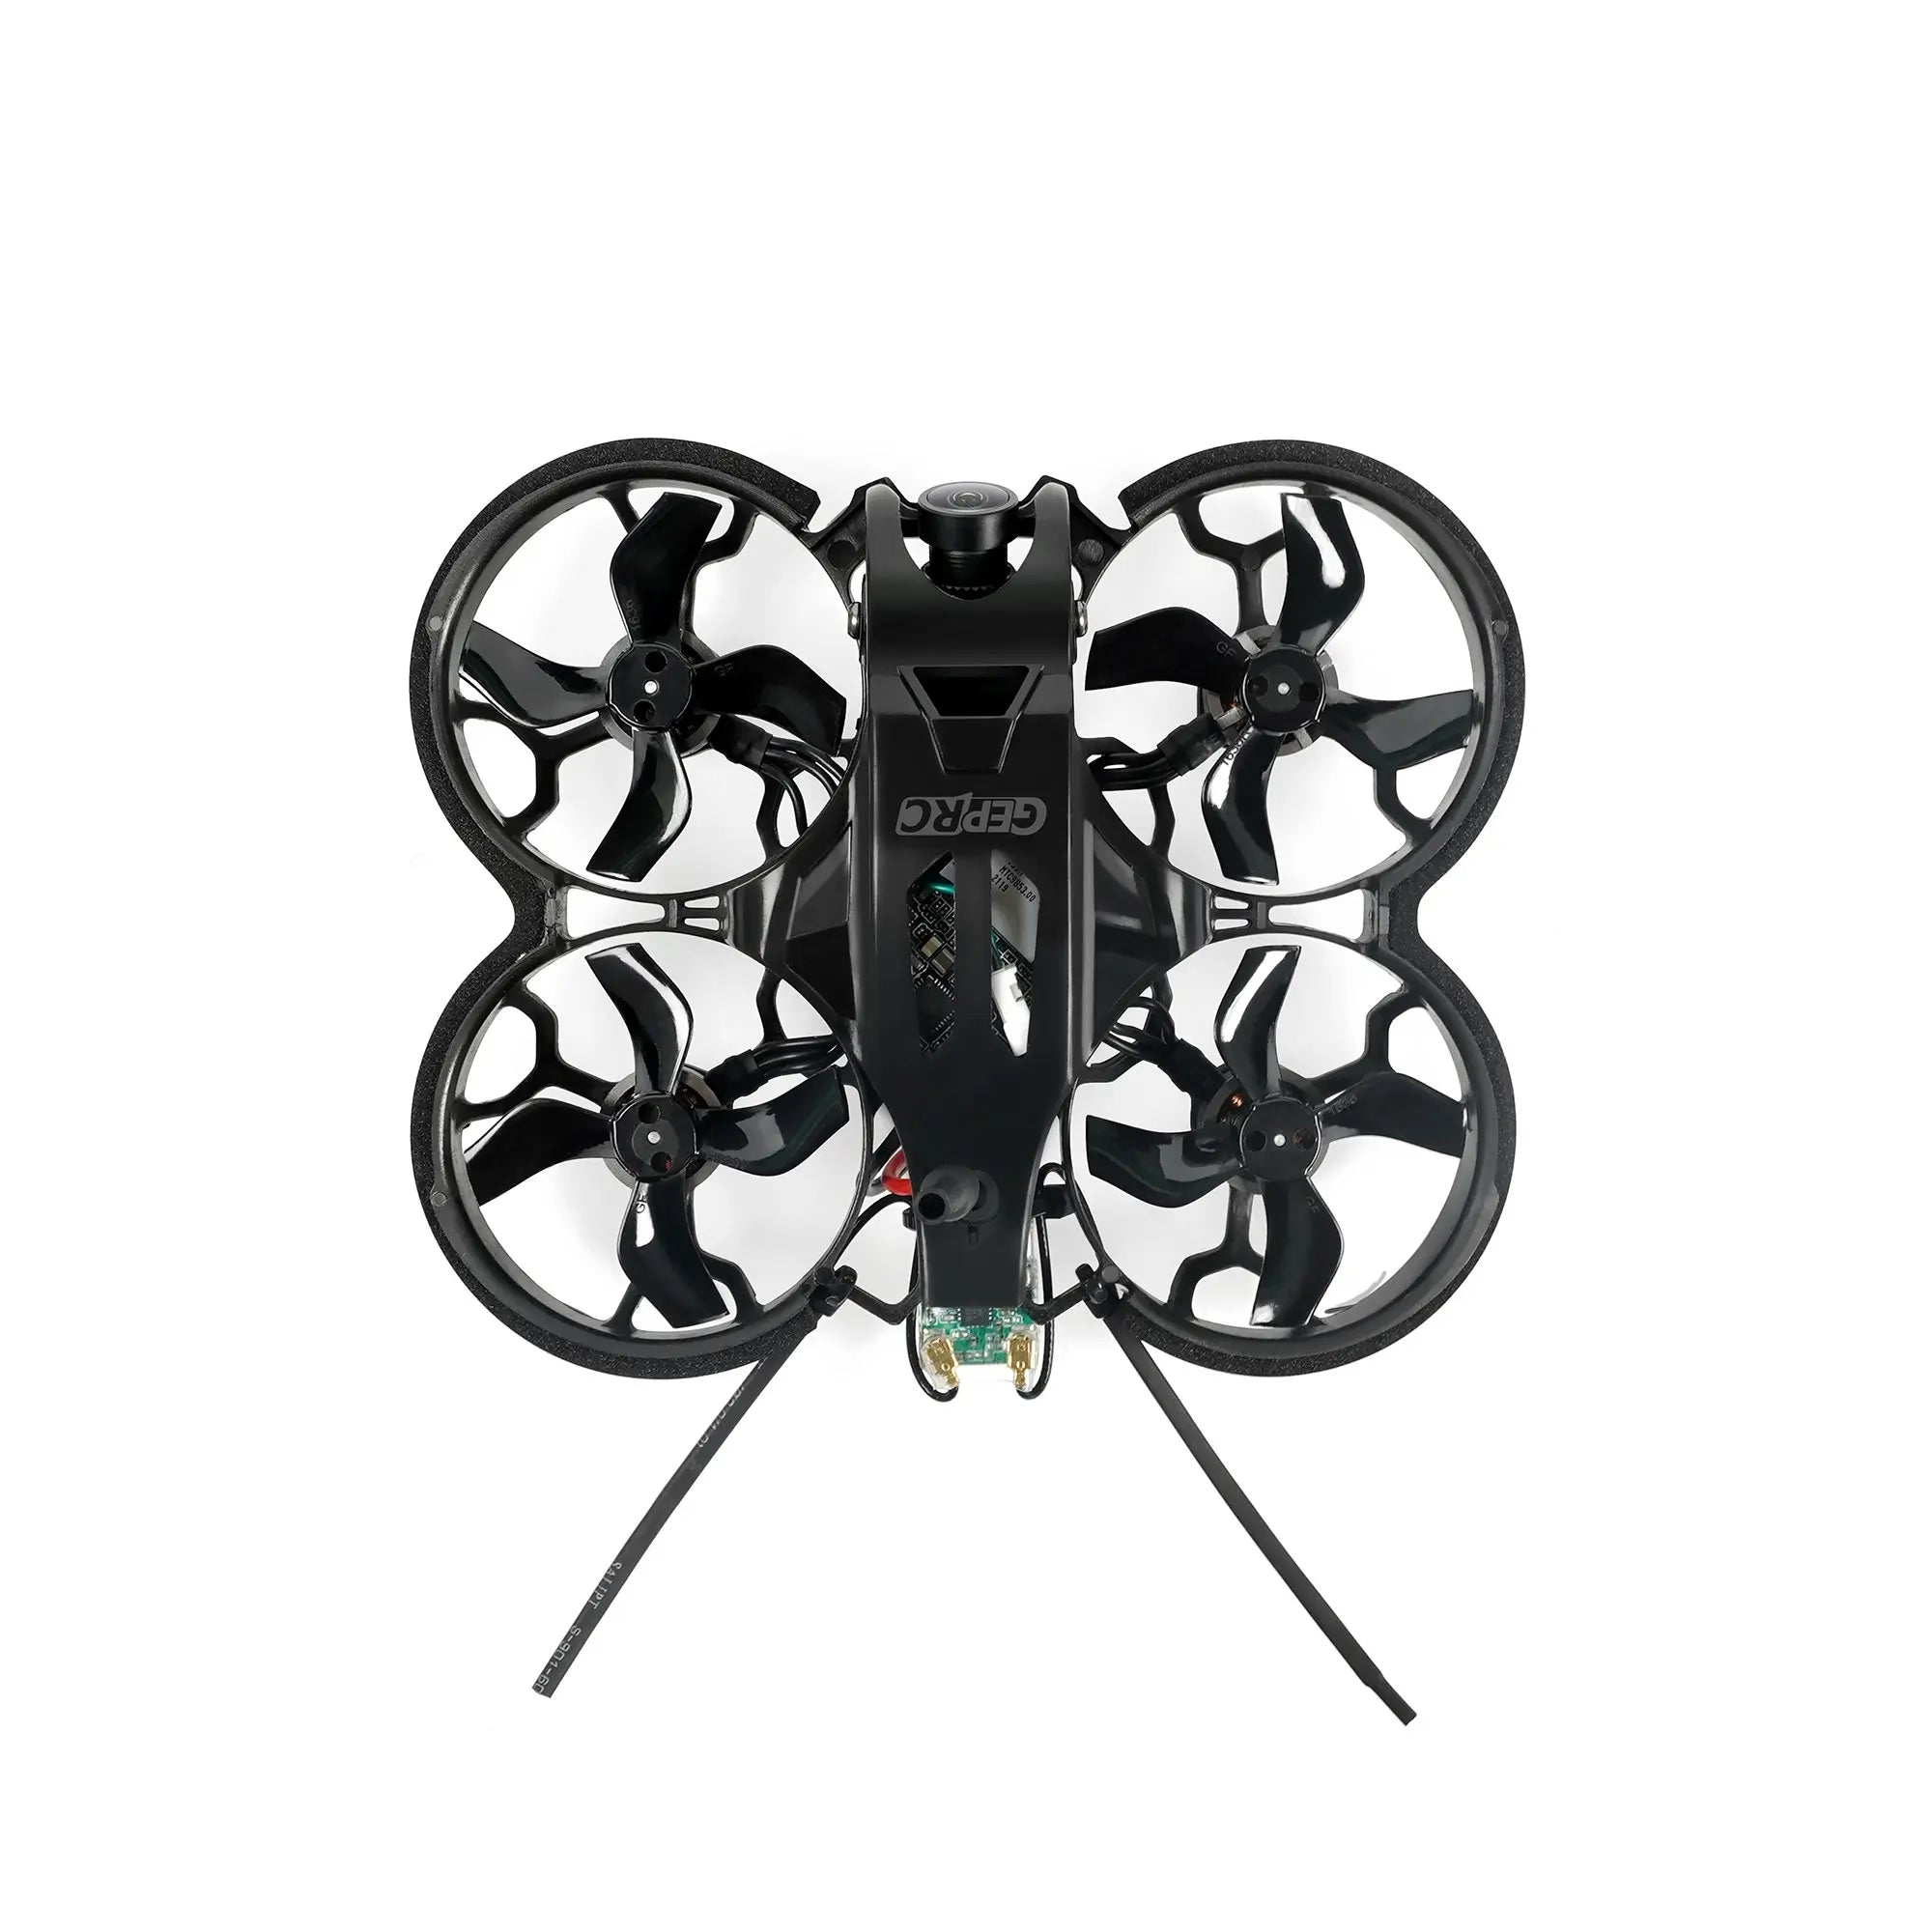 GEPRC TinyGO FPV Drone, TinyGO currently has two versions: the indoor version and the 4K professional version.